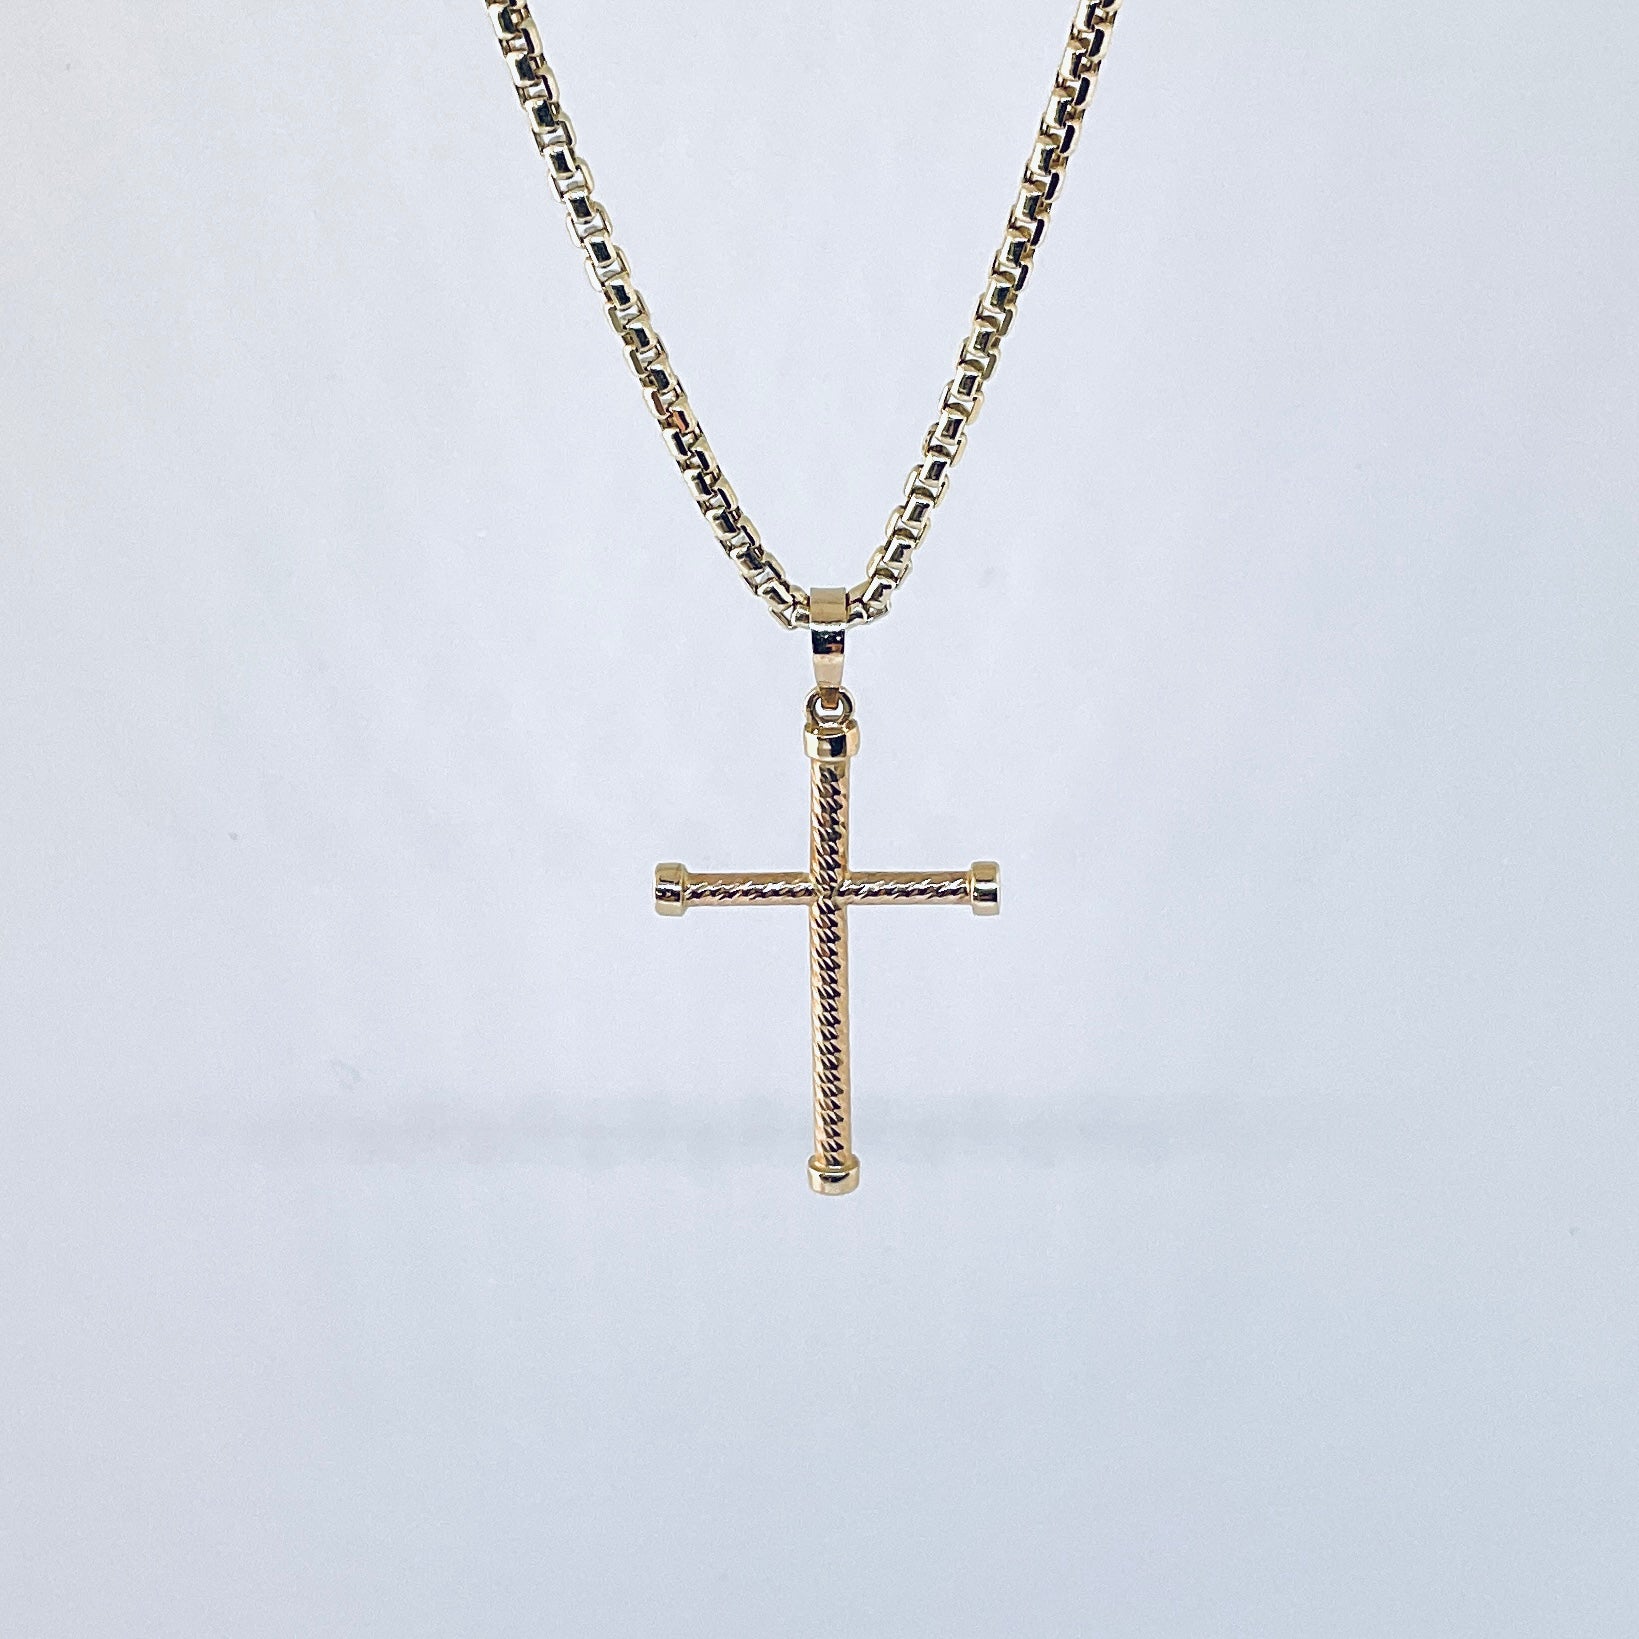 WD939 14kt Rope style Cross Pendant only